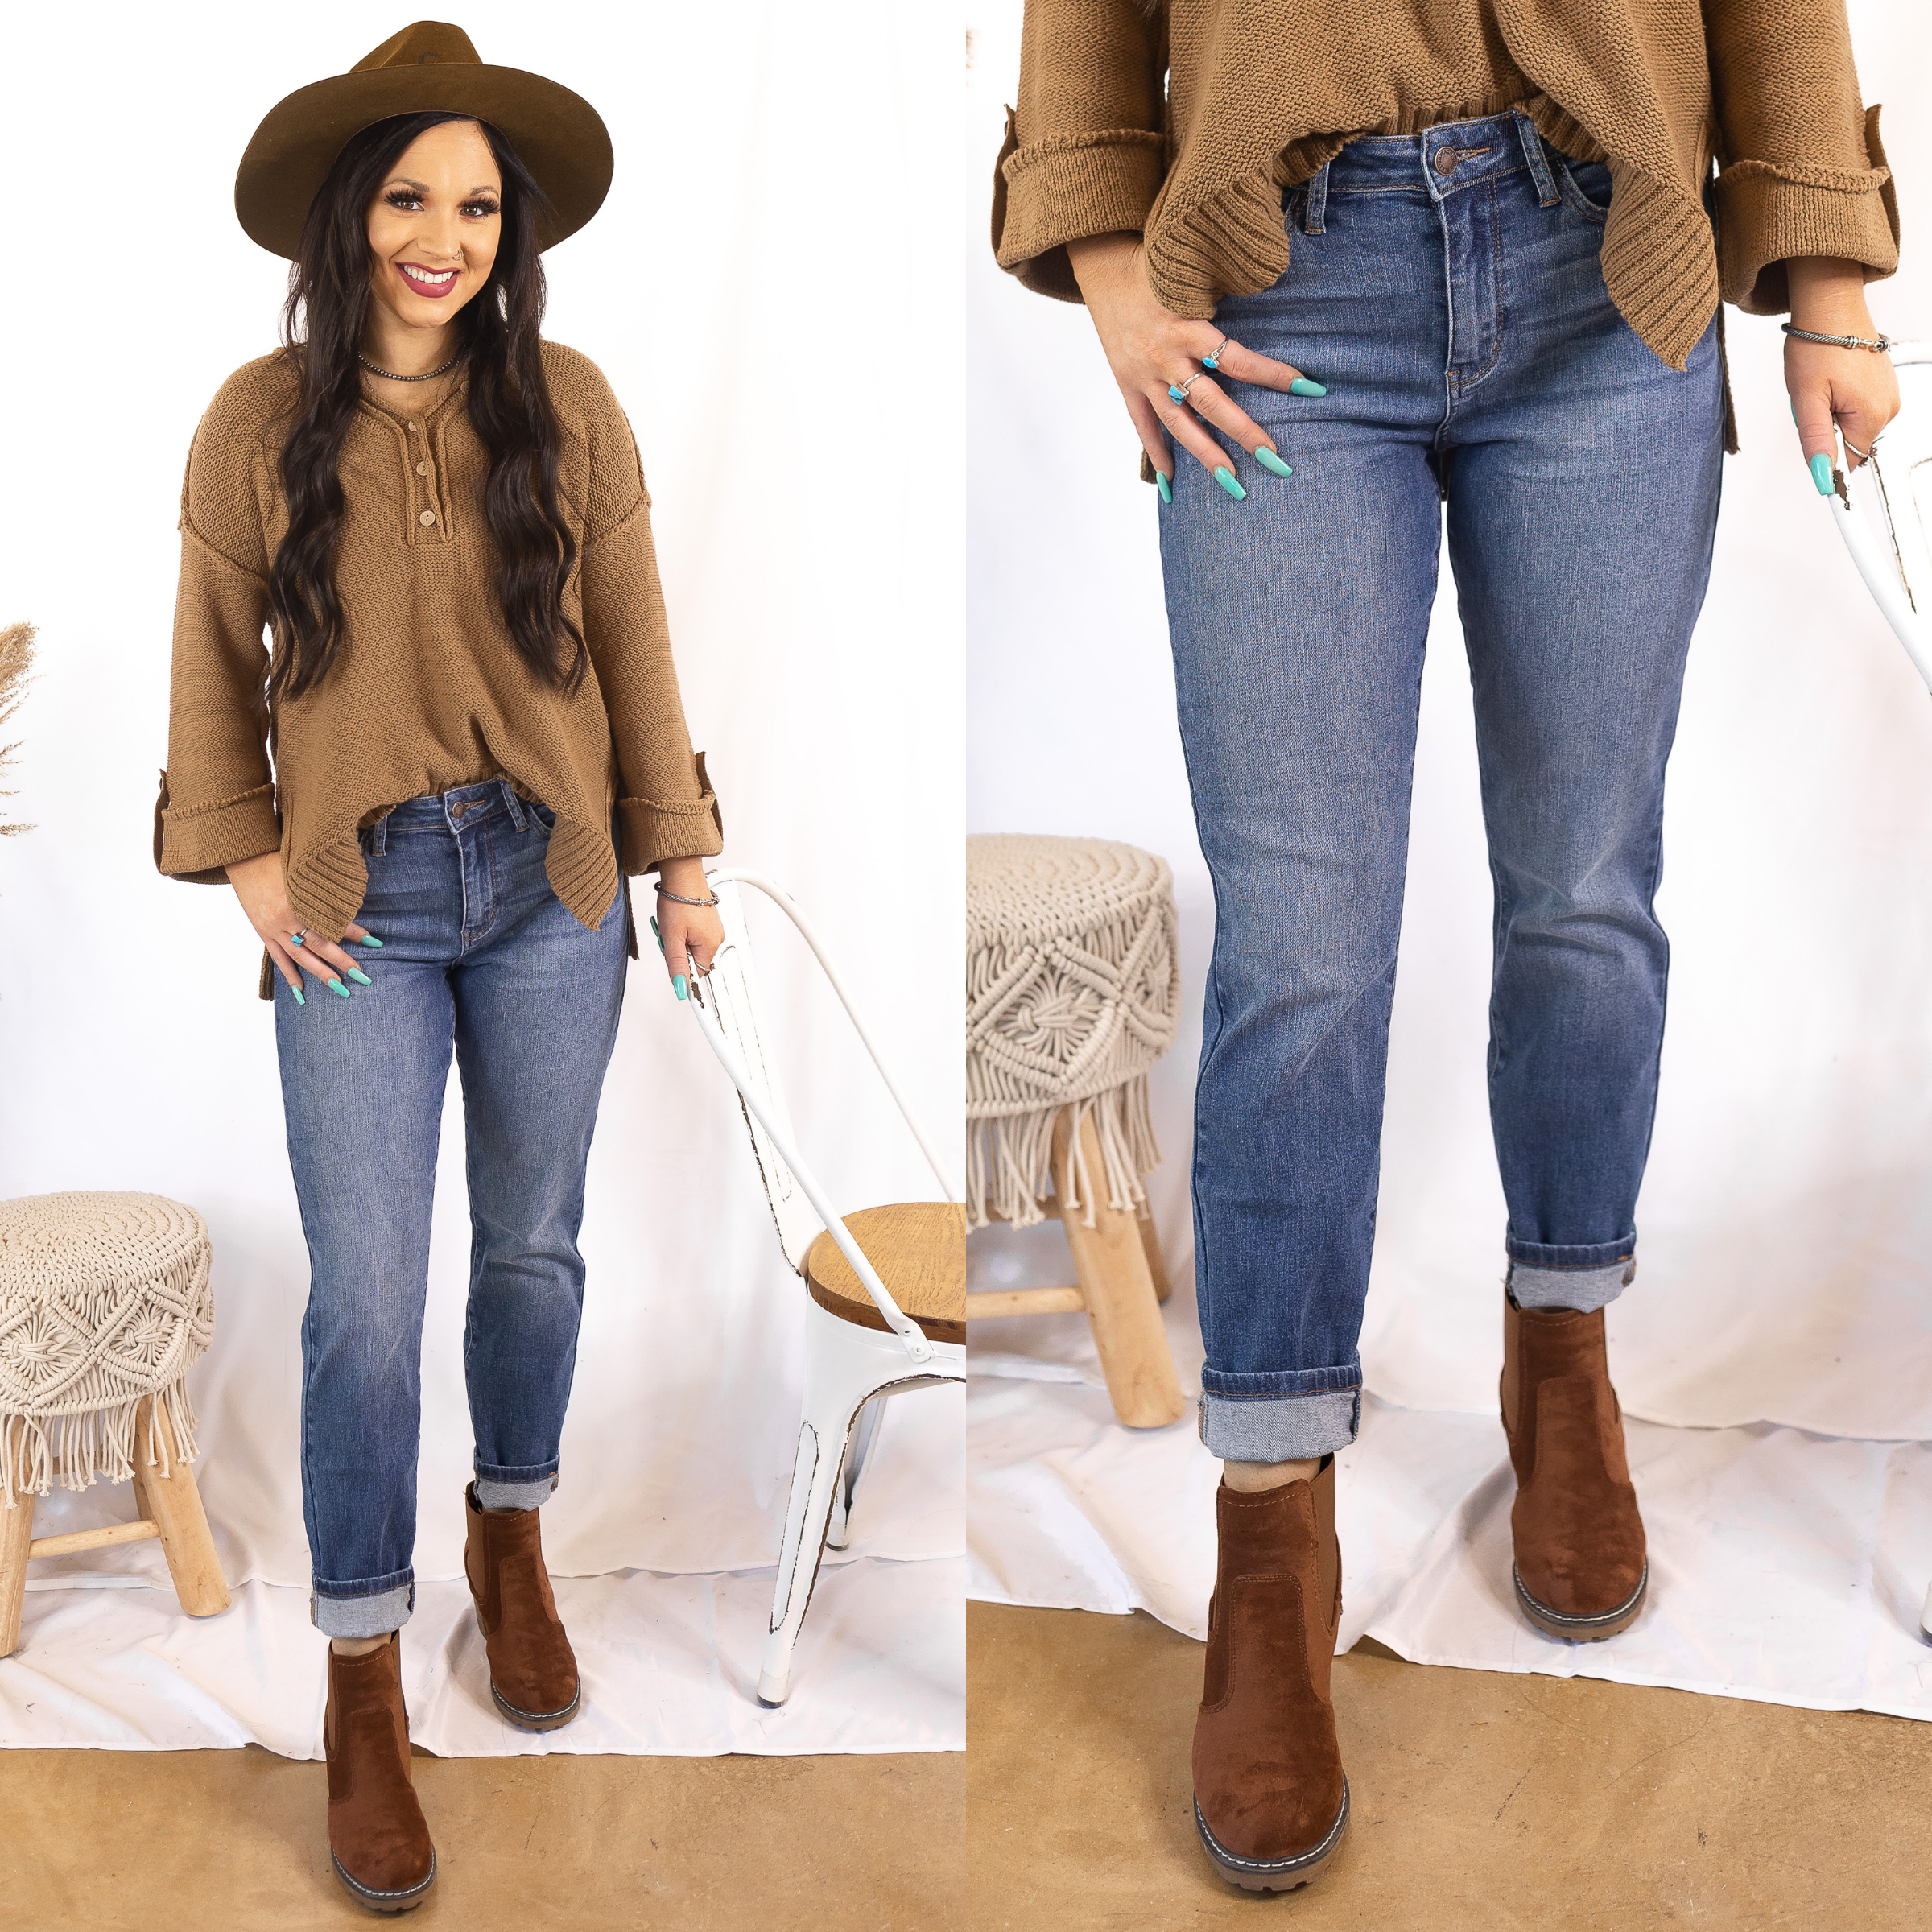 Model is wearing medium wash jeans that are cuffed and have no distressing. Model has them paired with a tan sweater, brown booties, and a brown hat.